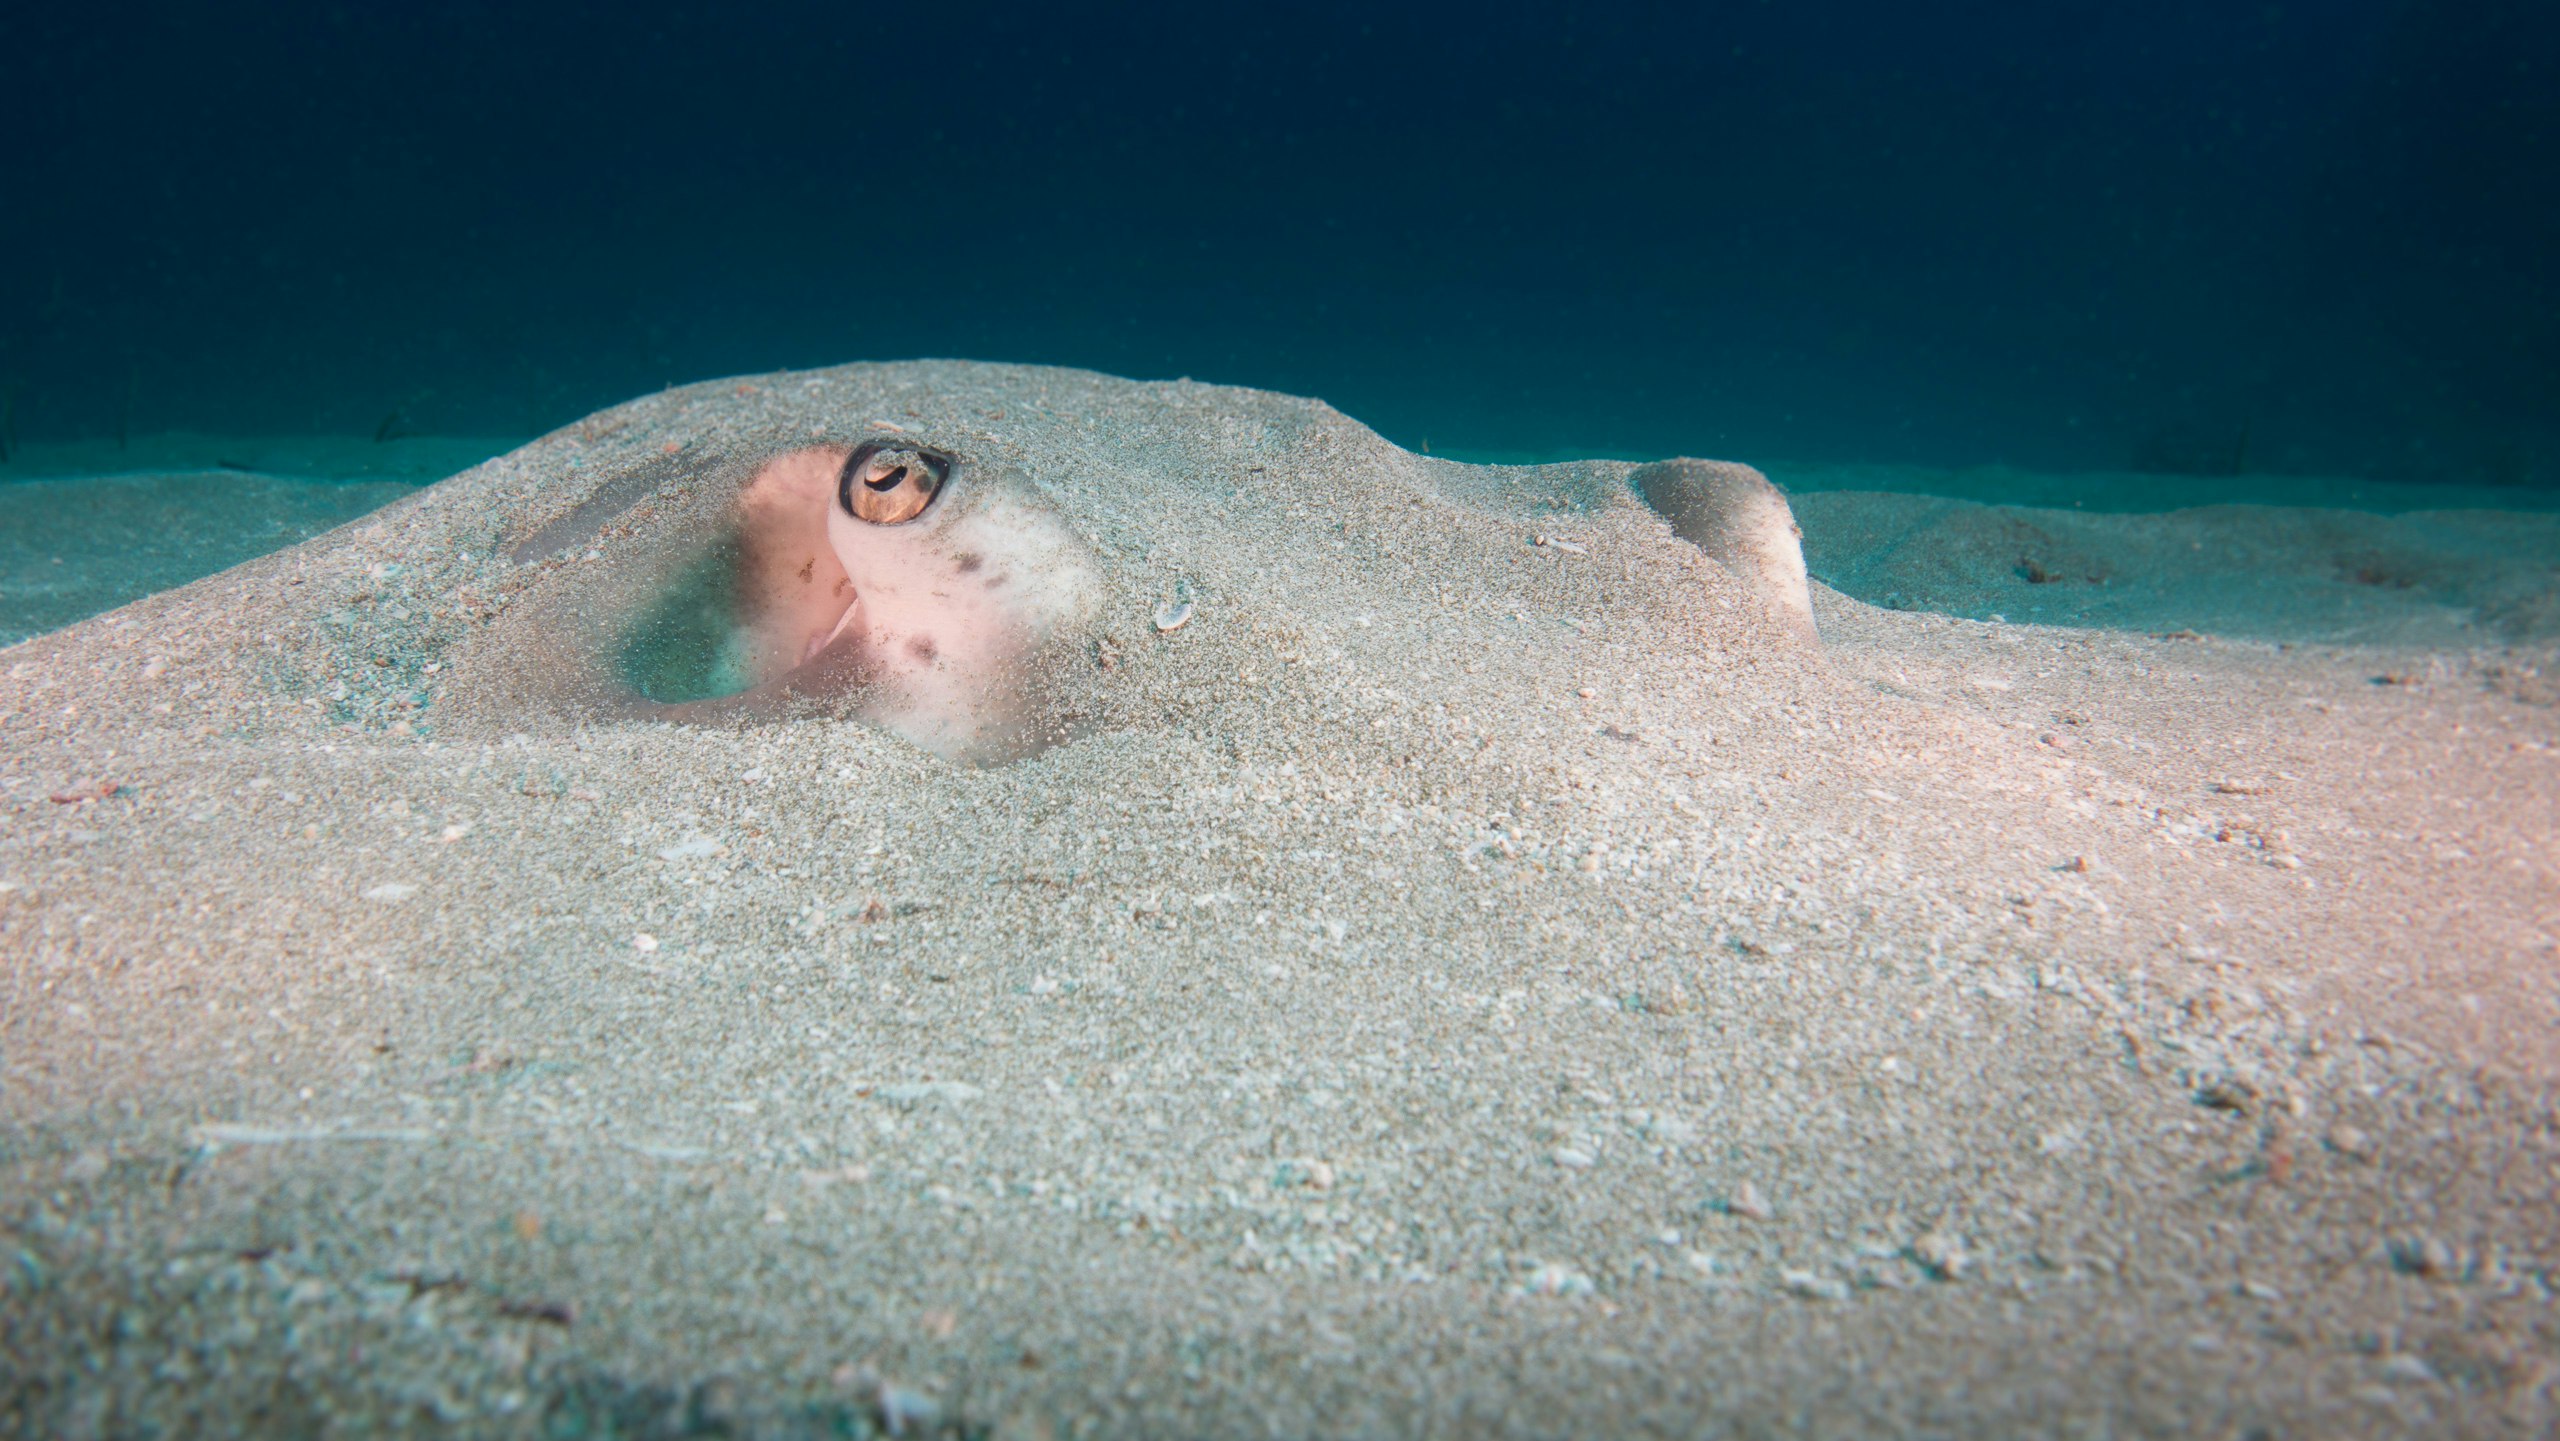 The flat body has sharp corners and allows the stingray to efficiently bury itself in the sand to avoid predators.